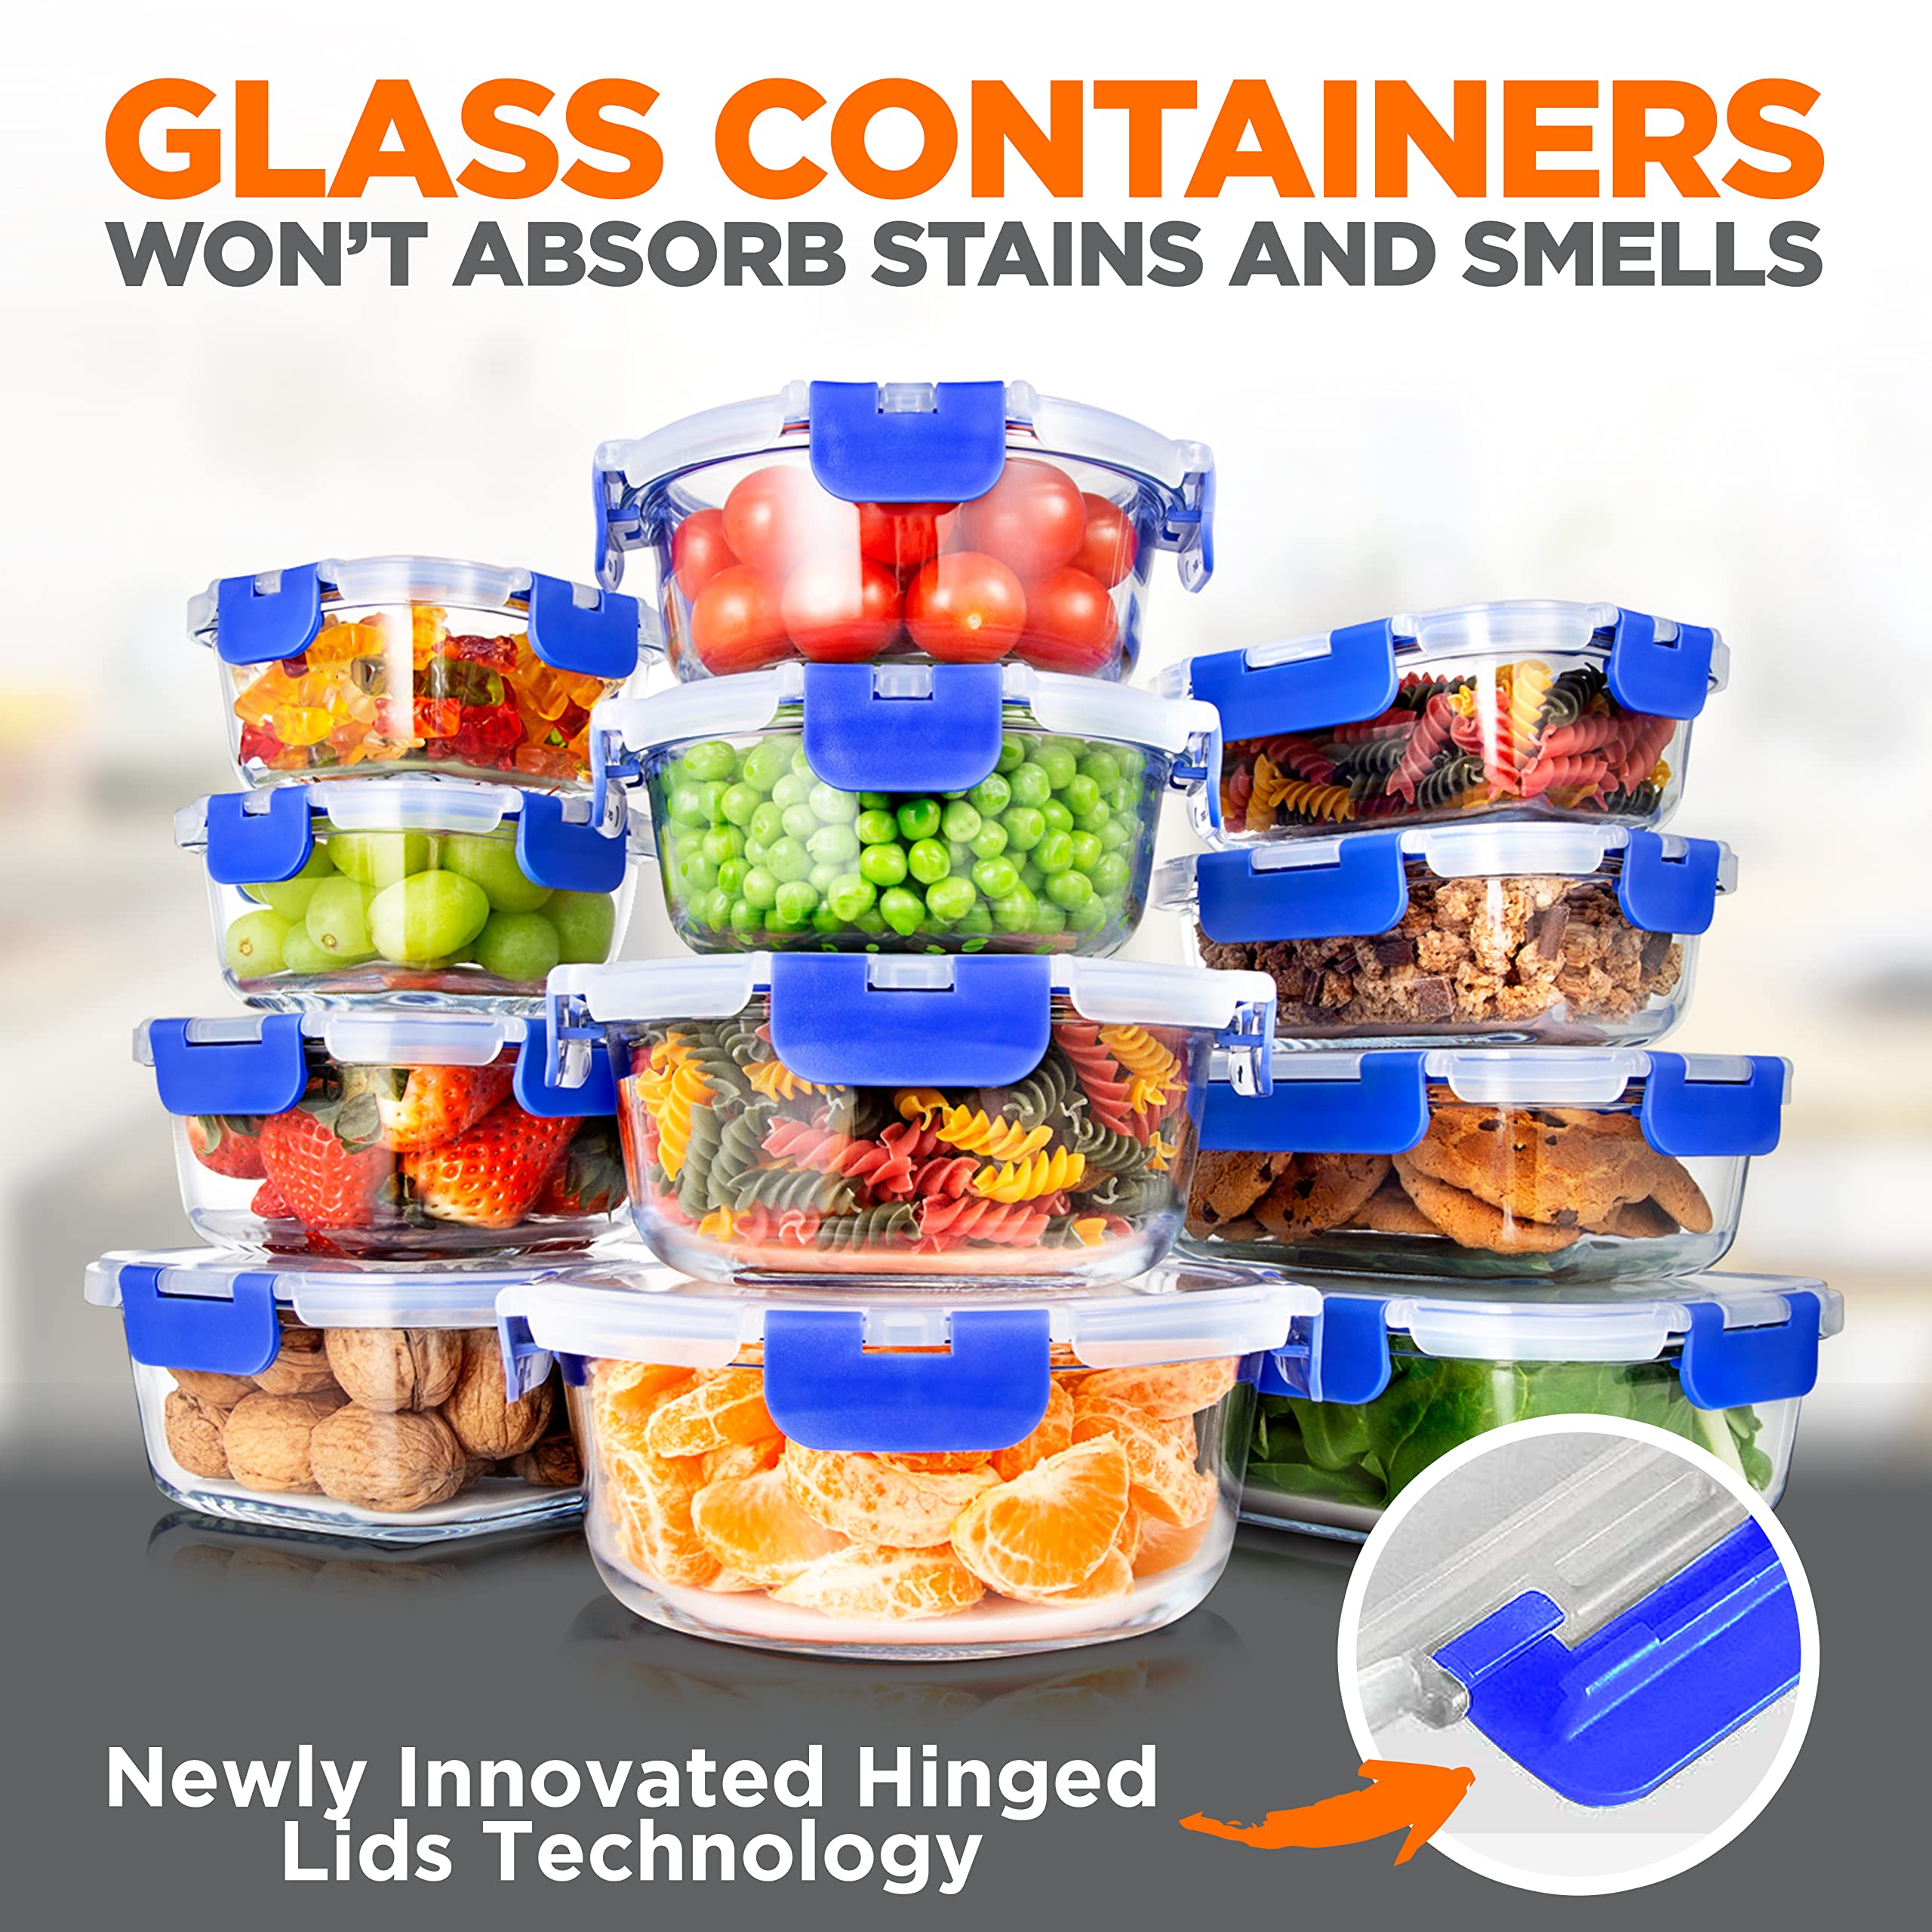 SereneLife 24-Piece Food Storage Containers - Superior Glass Food Storage Set, Stackable Design with Newly Innovated Hinged Locking lids, 11 To 35 Oz. Capacity, Blue - SLGL24BL